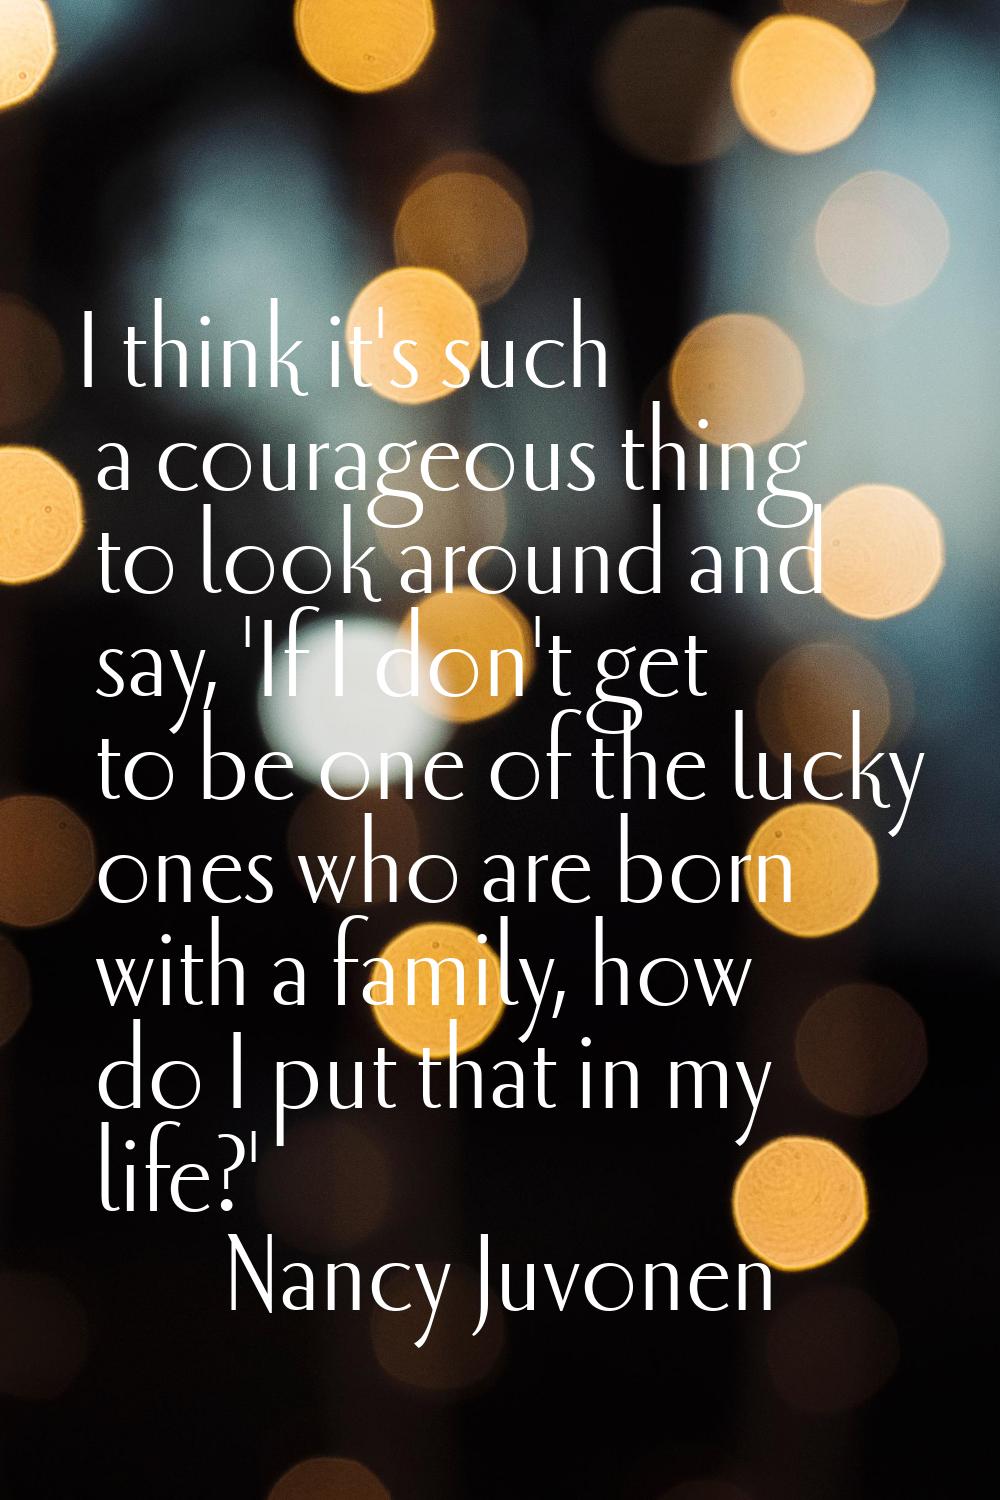 I think it's such a courageous thing to look around and say, 'If I don't get to be one of the lucky